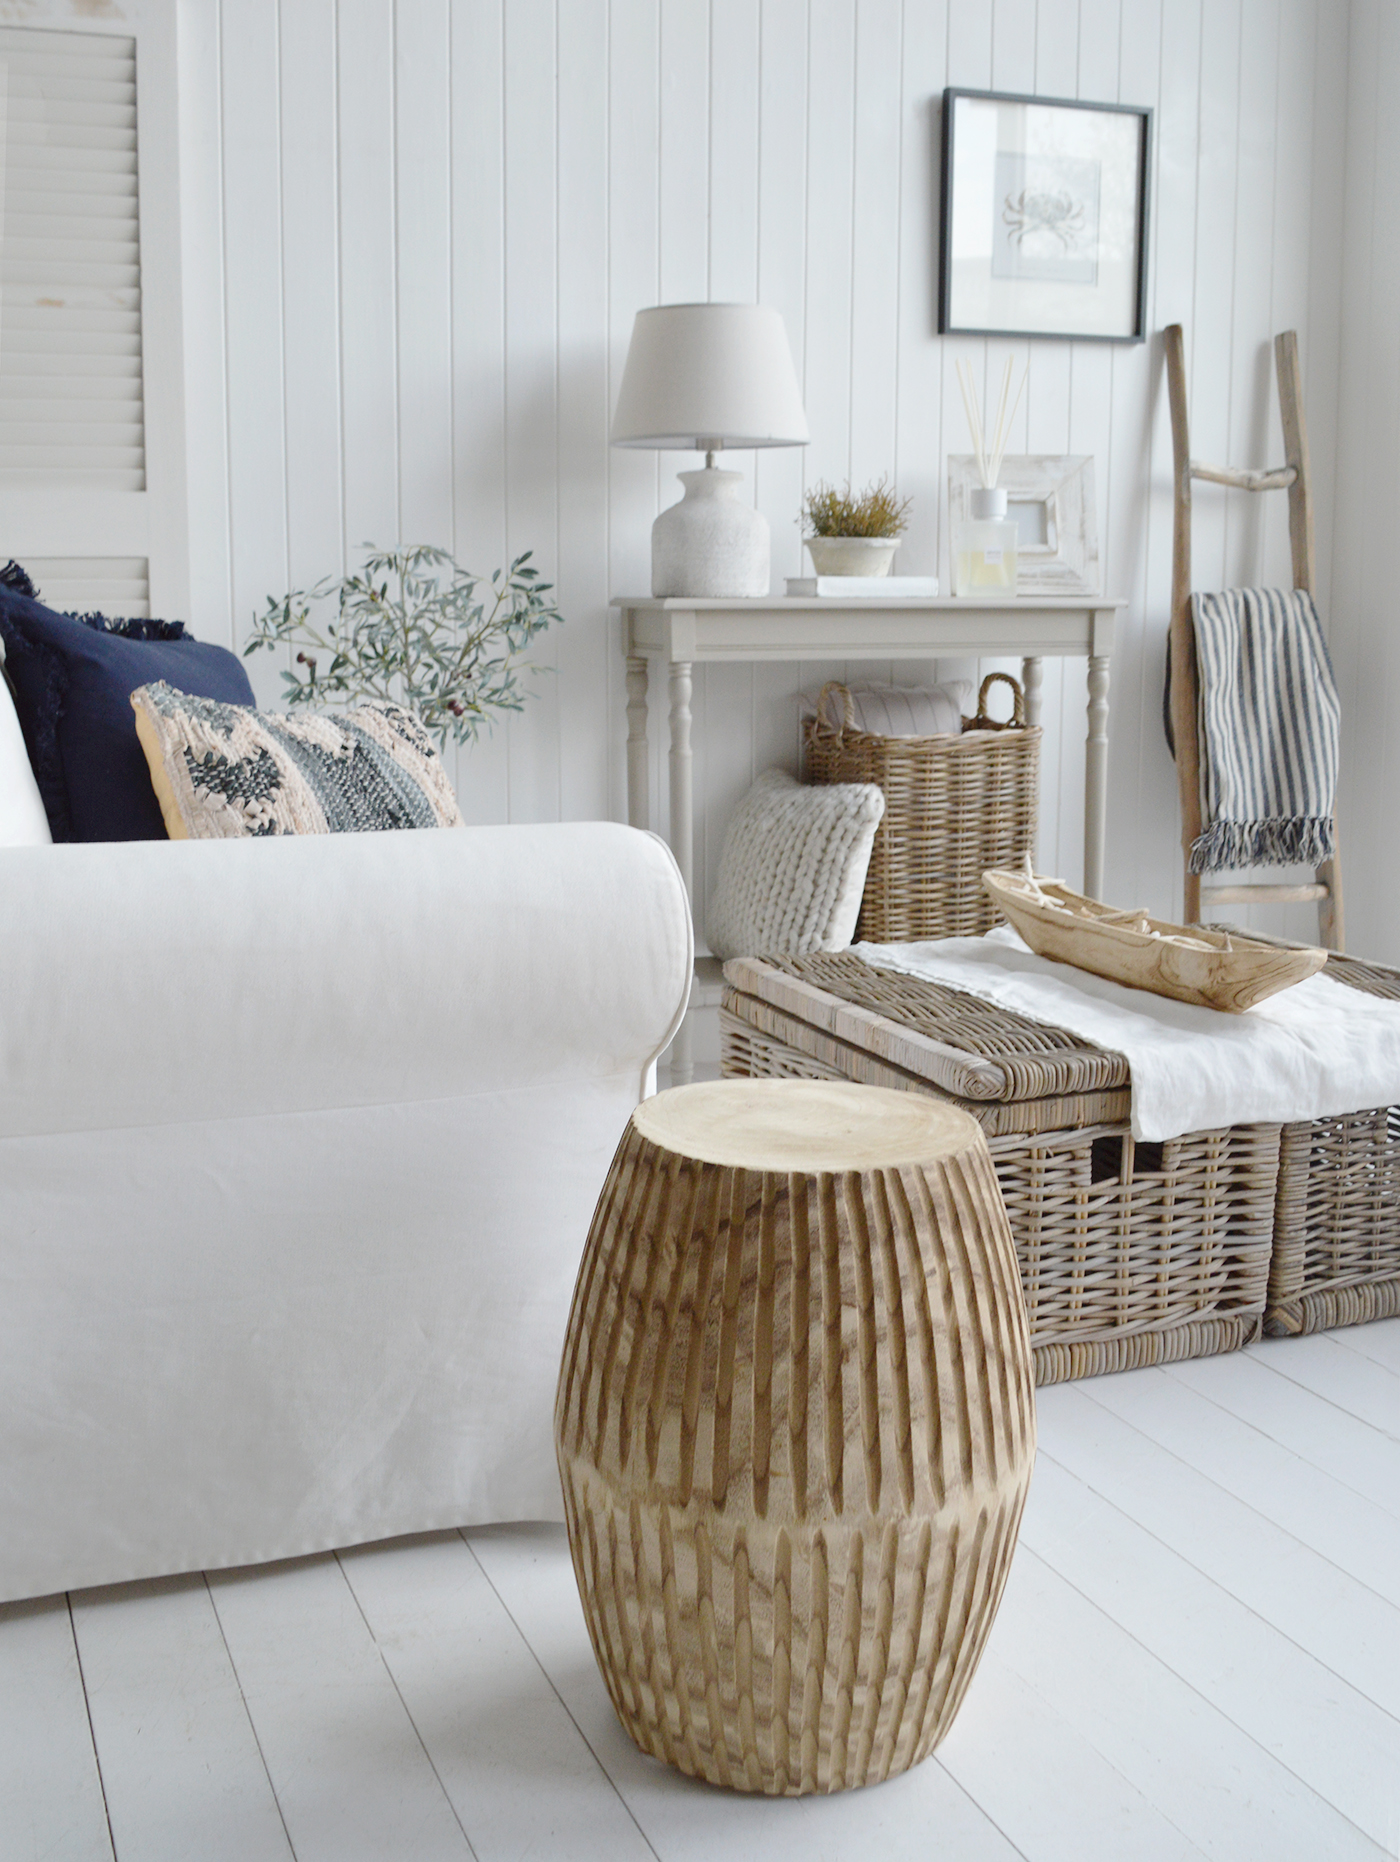 The Baster stool, a natural piece of furniture for a coastally inspired Hamptons room